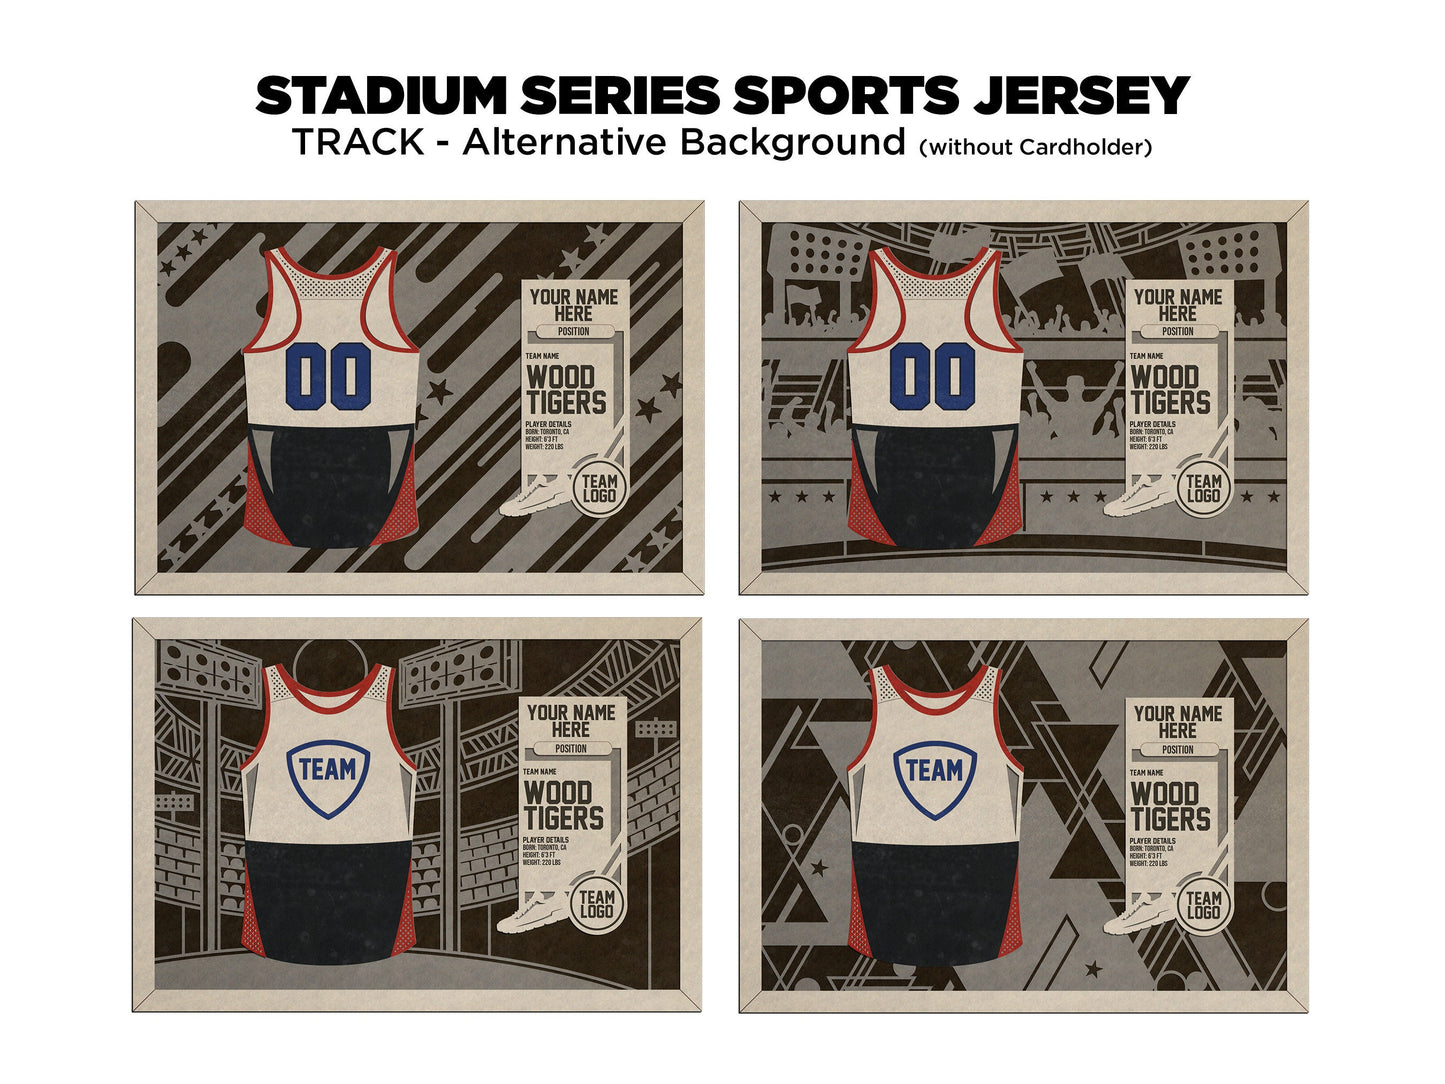 Stadium Series Jerseys - Track and Field - 3 Variations - Male, Female & Alternate Backgrounds - SVG File Download - Sized for Glowforge